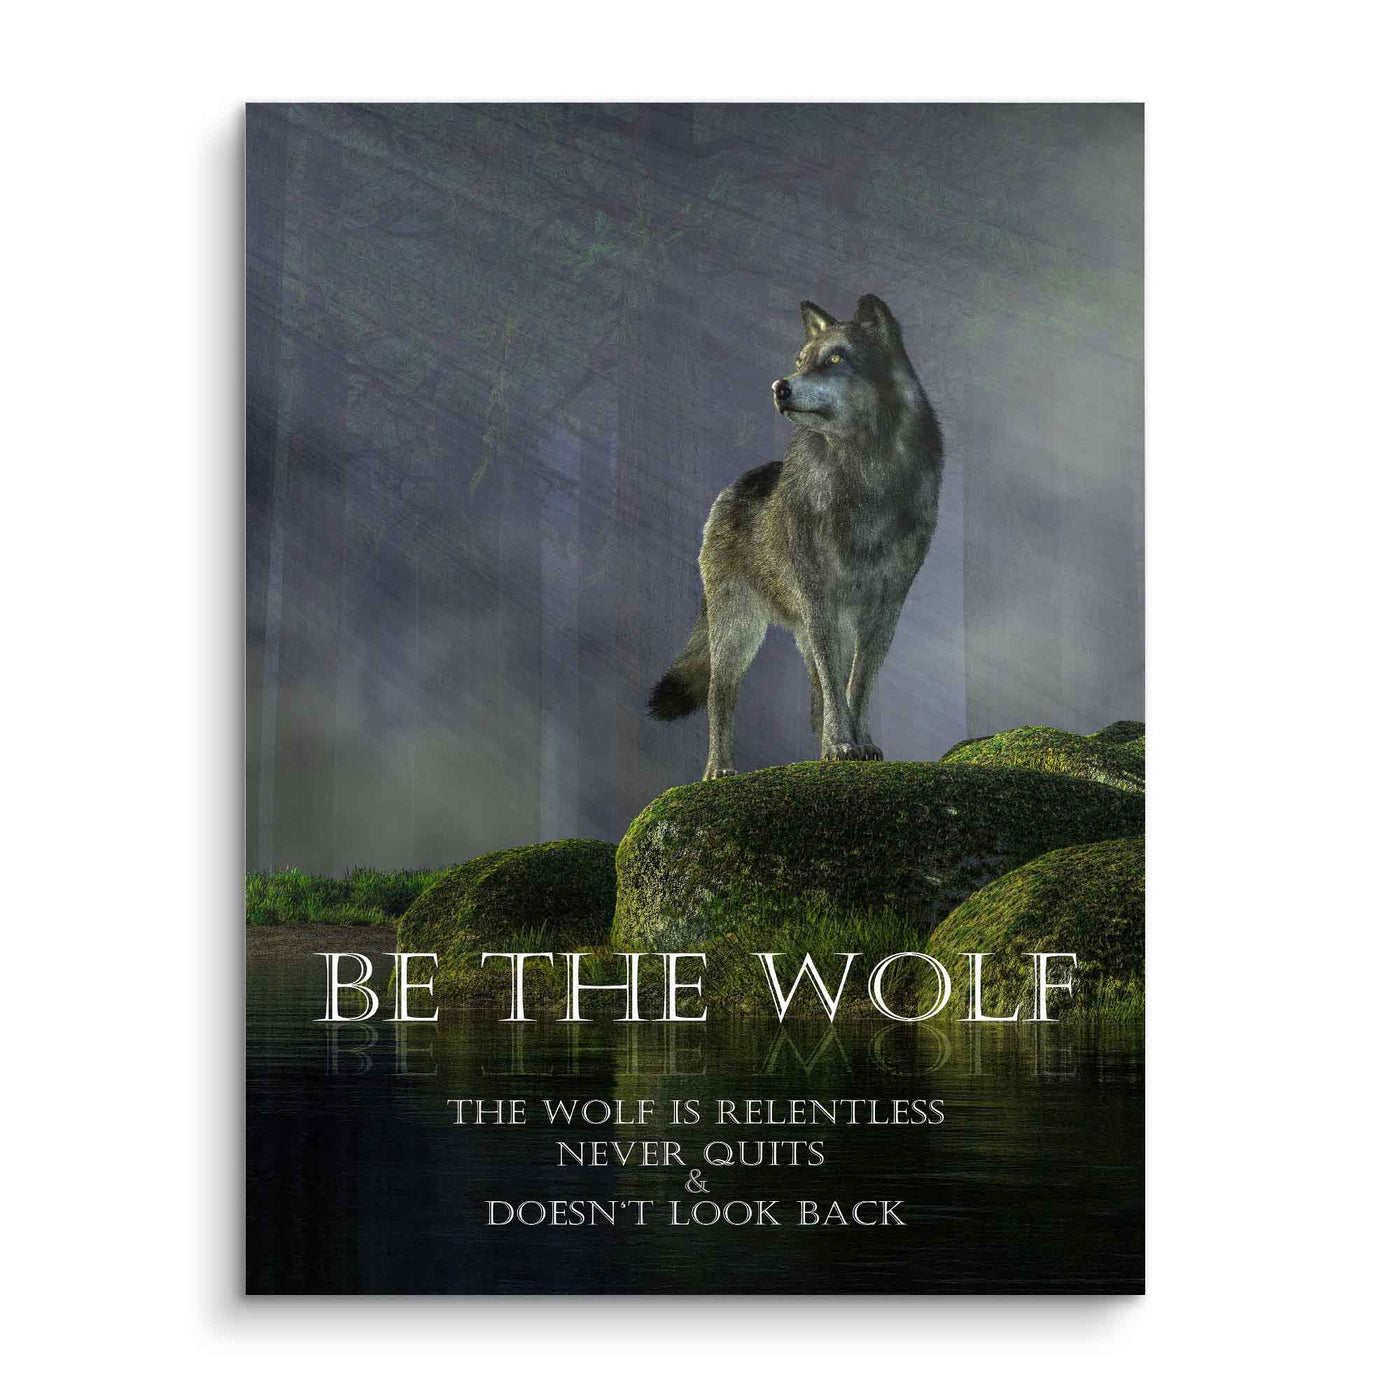 Be the wolf